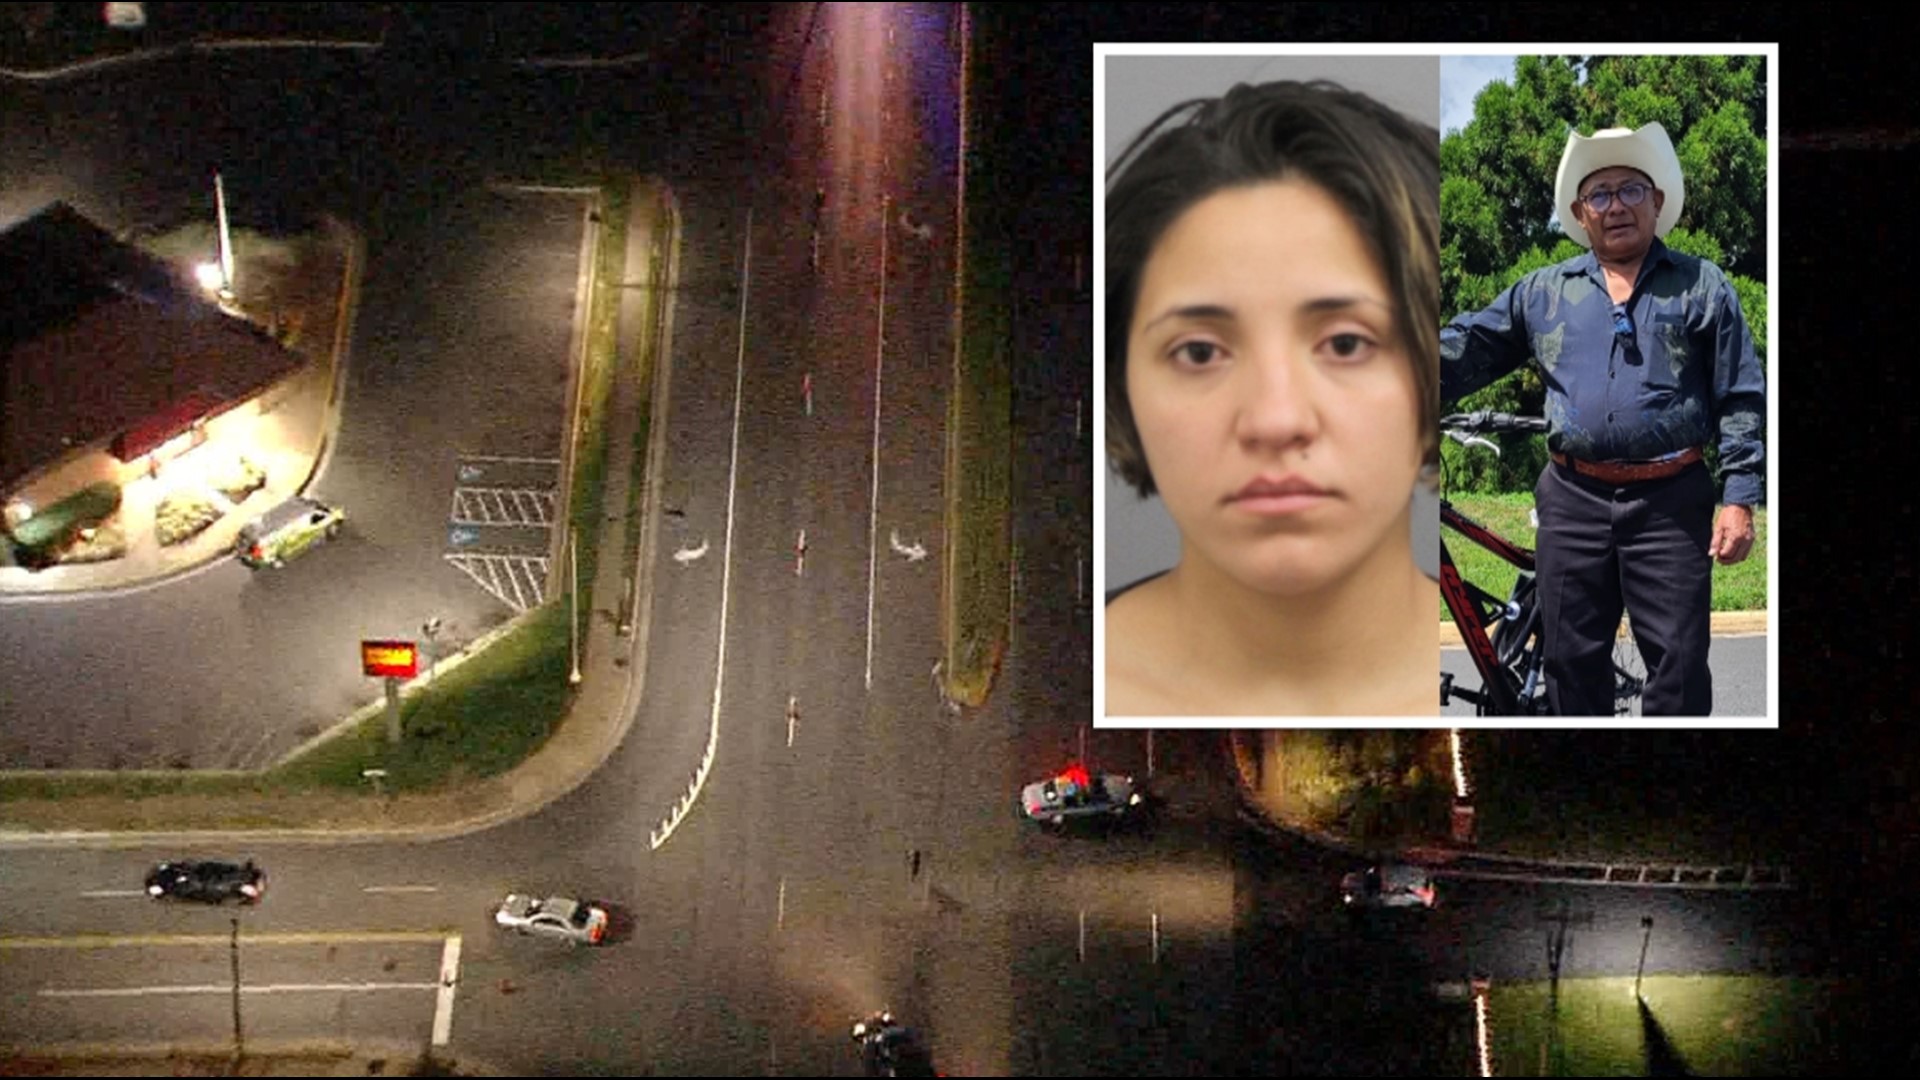 A Manassas woman is now charged with murder and preventing a 911 call after police say she ran over a father of four walking on the side of the road.